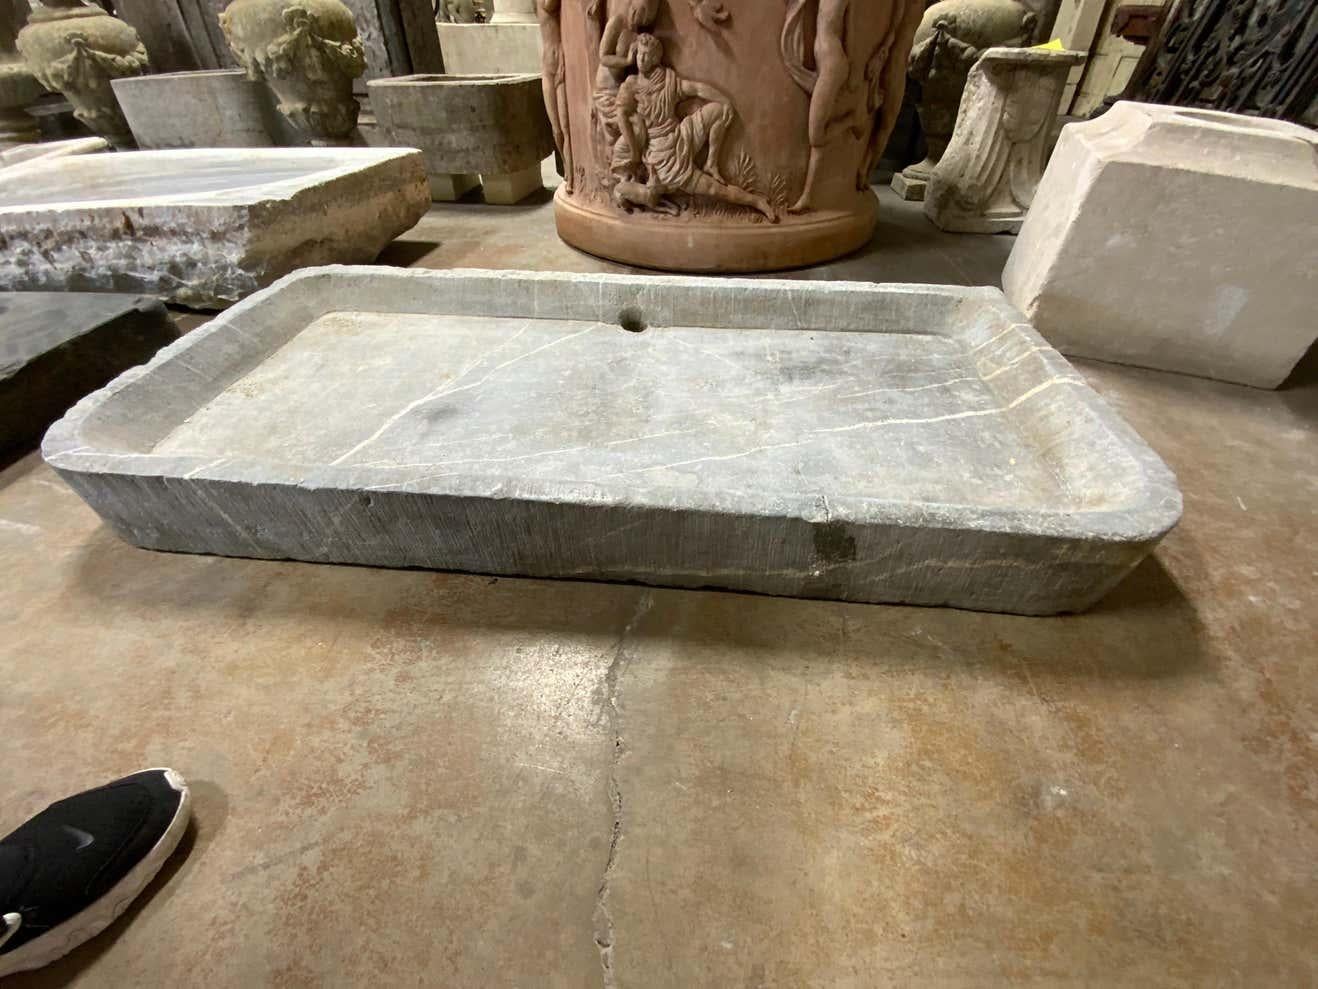 This gorgeous bluestone sink dates back to the early 1800s. Origin; Belgium.